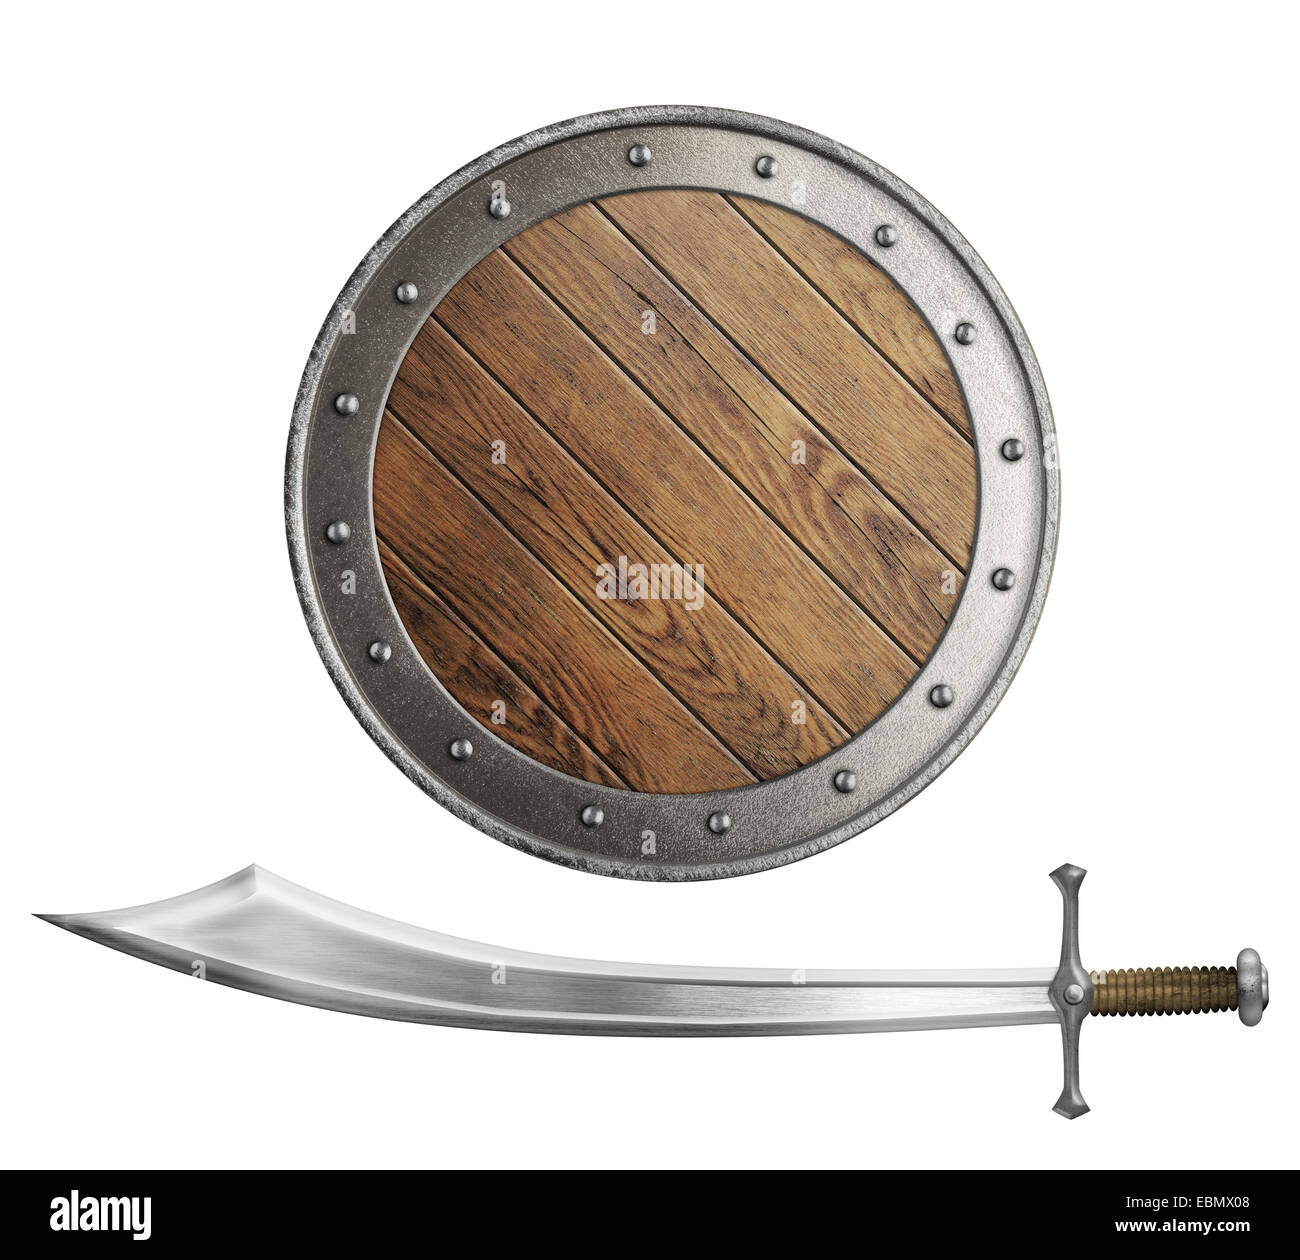 medieval wooden shield and sword or saber isolated Stock Photo